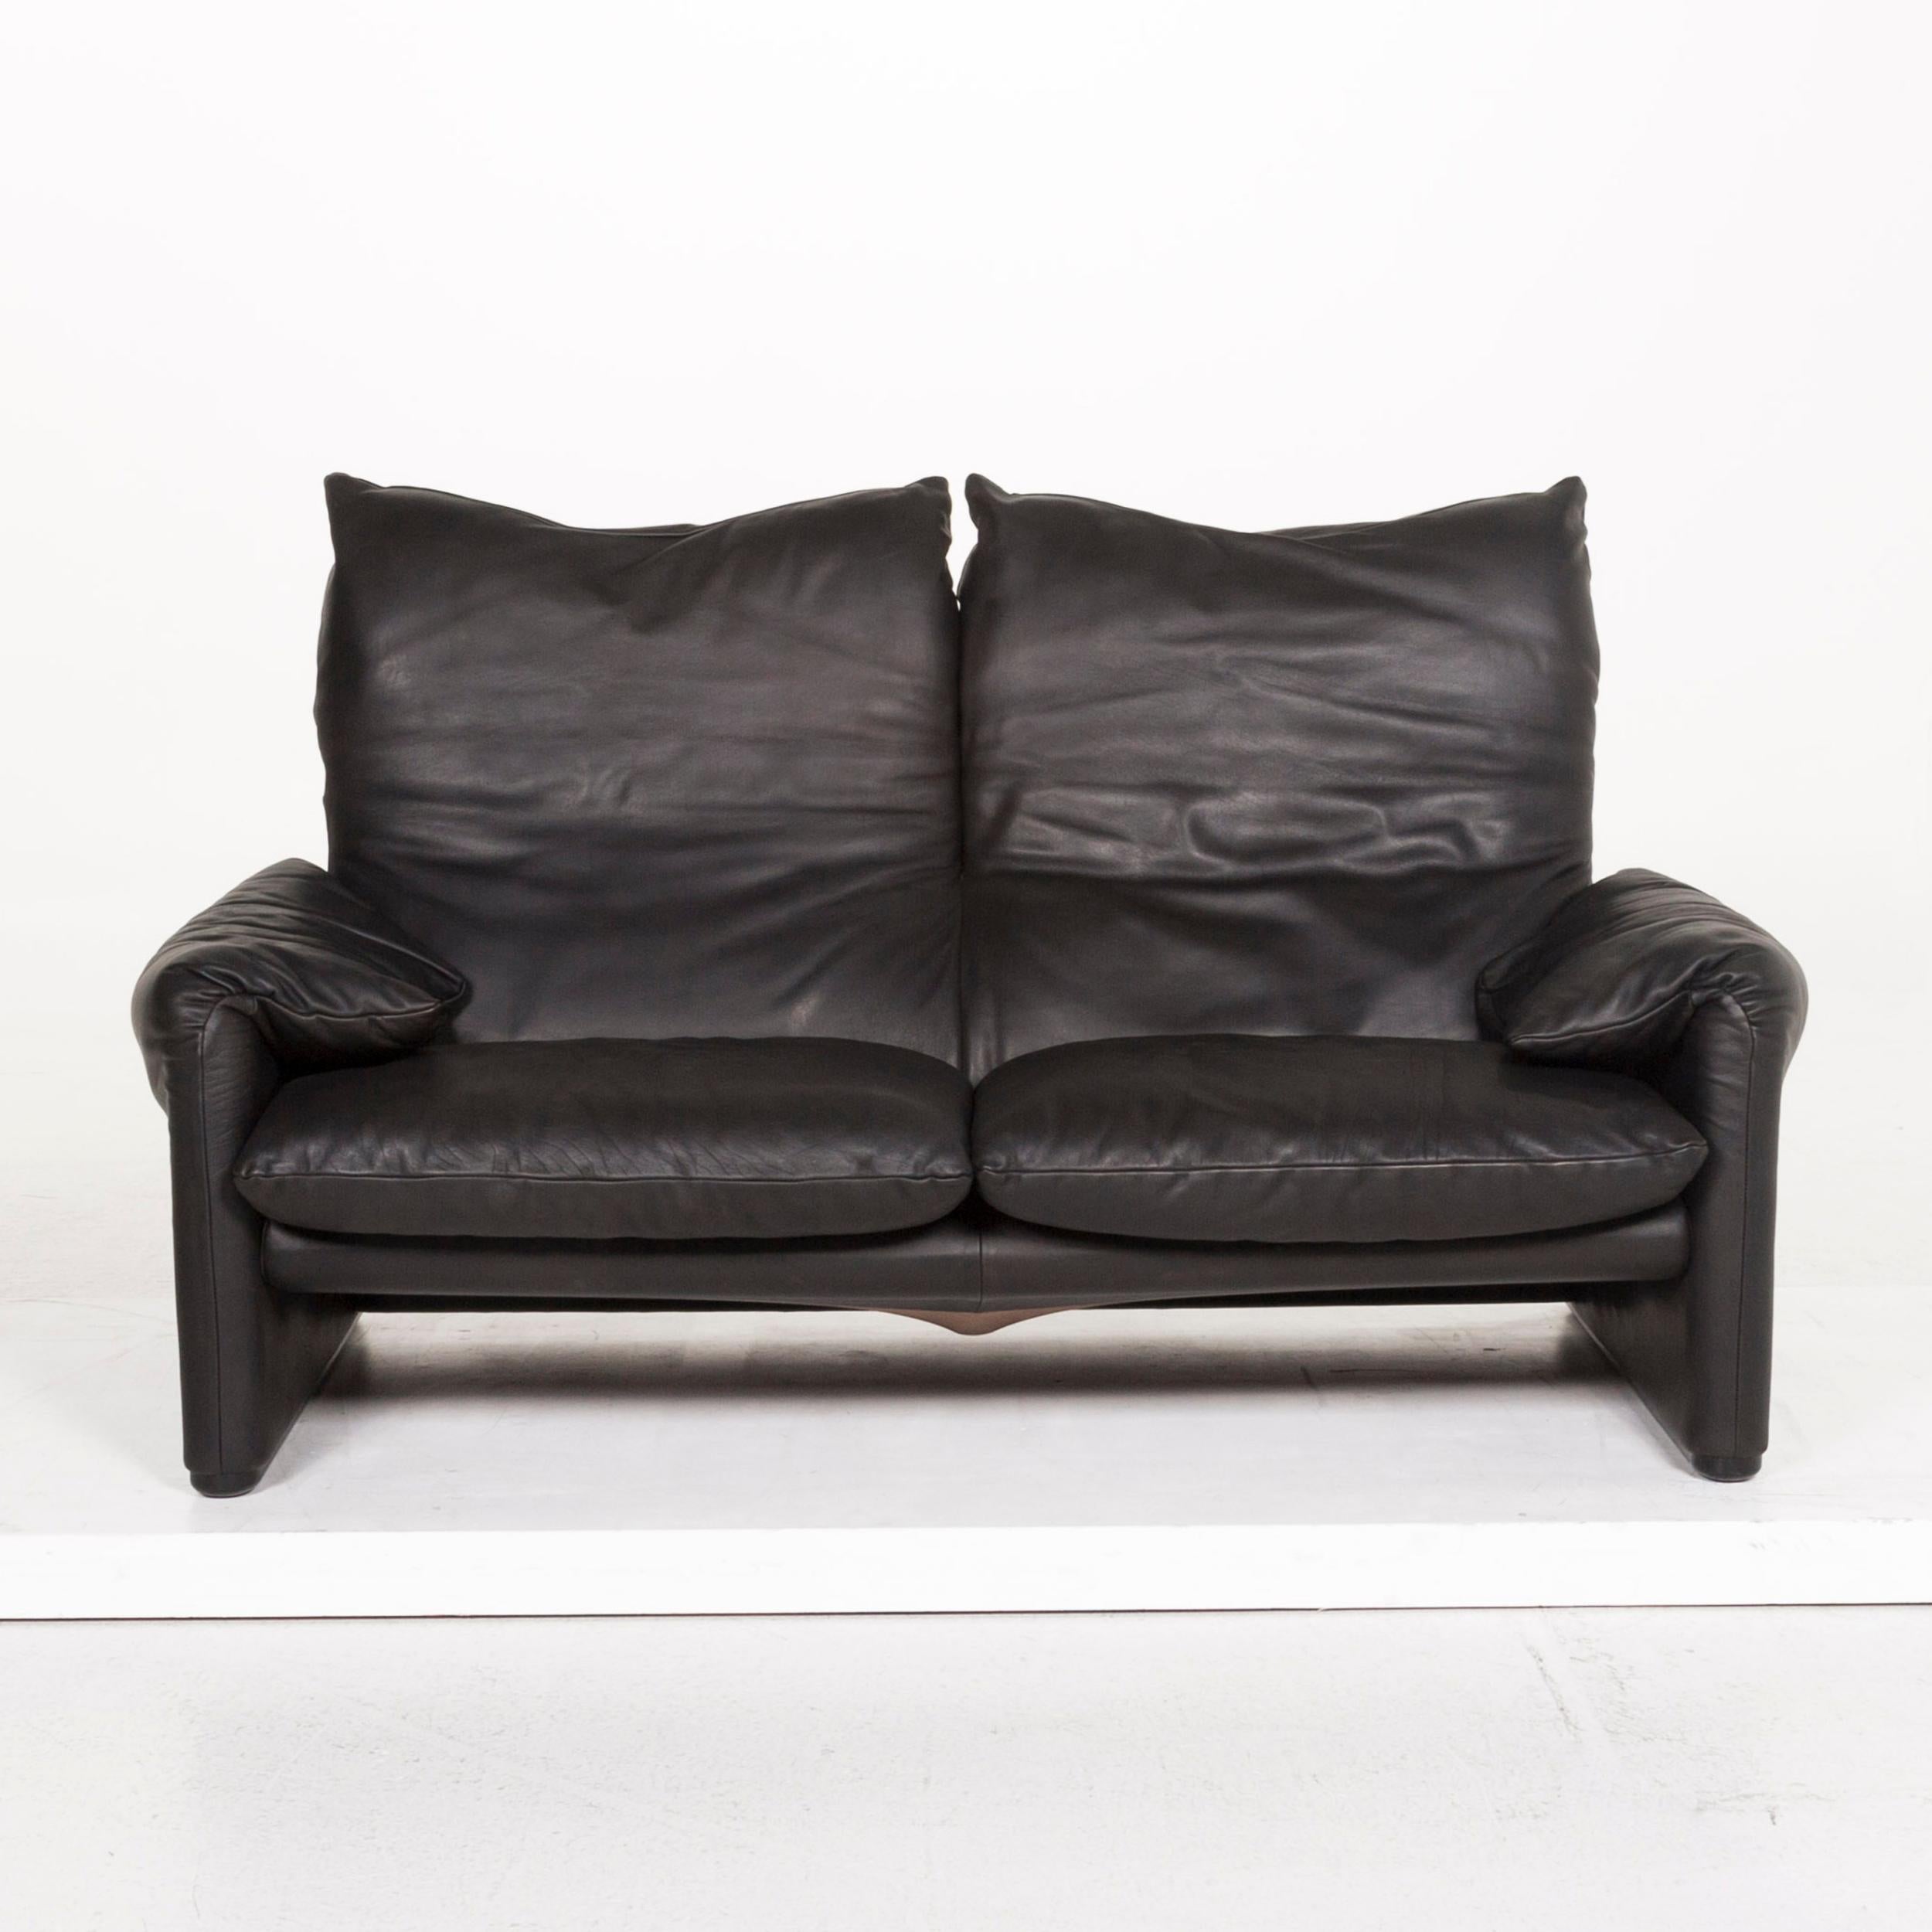 We bring to you a Cassina Maralunga leather sofa black two-seat function couch.


 Product measurements in centimeters:
 

Depth 83
Width 167
Height 70
Seat-height 41
Rest-height 52
Seat-depth 50
Seat-width 109
Back-height 28.
 